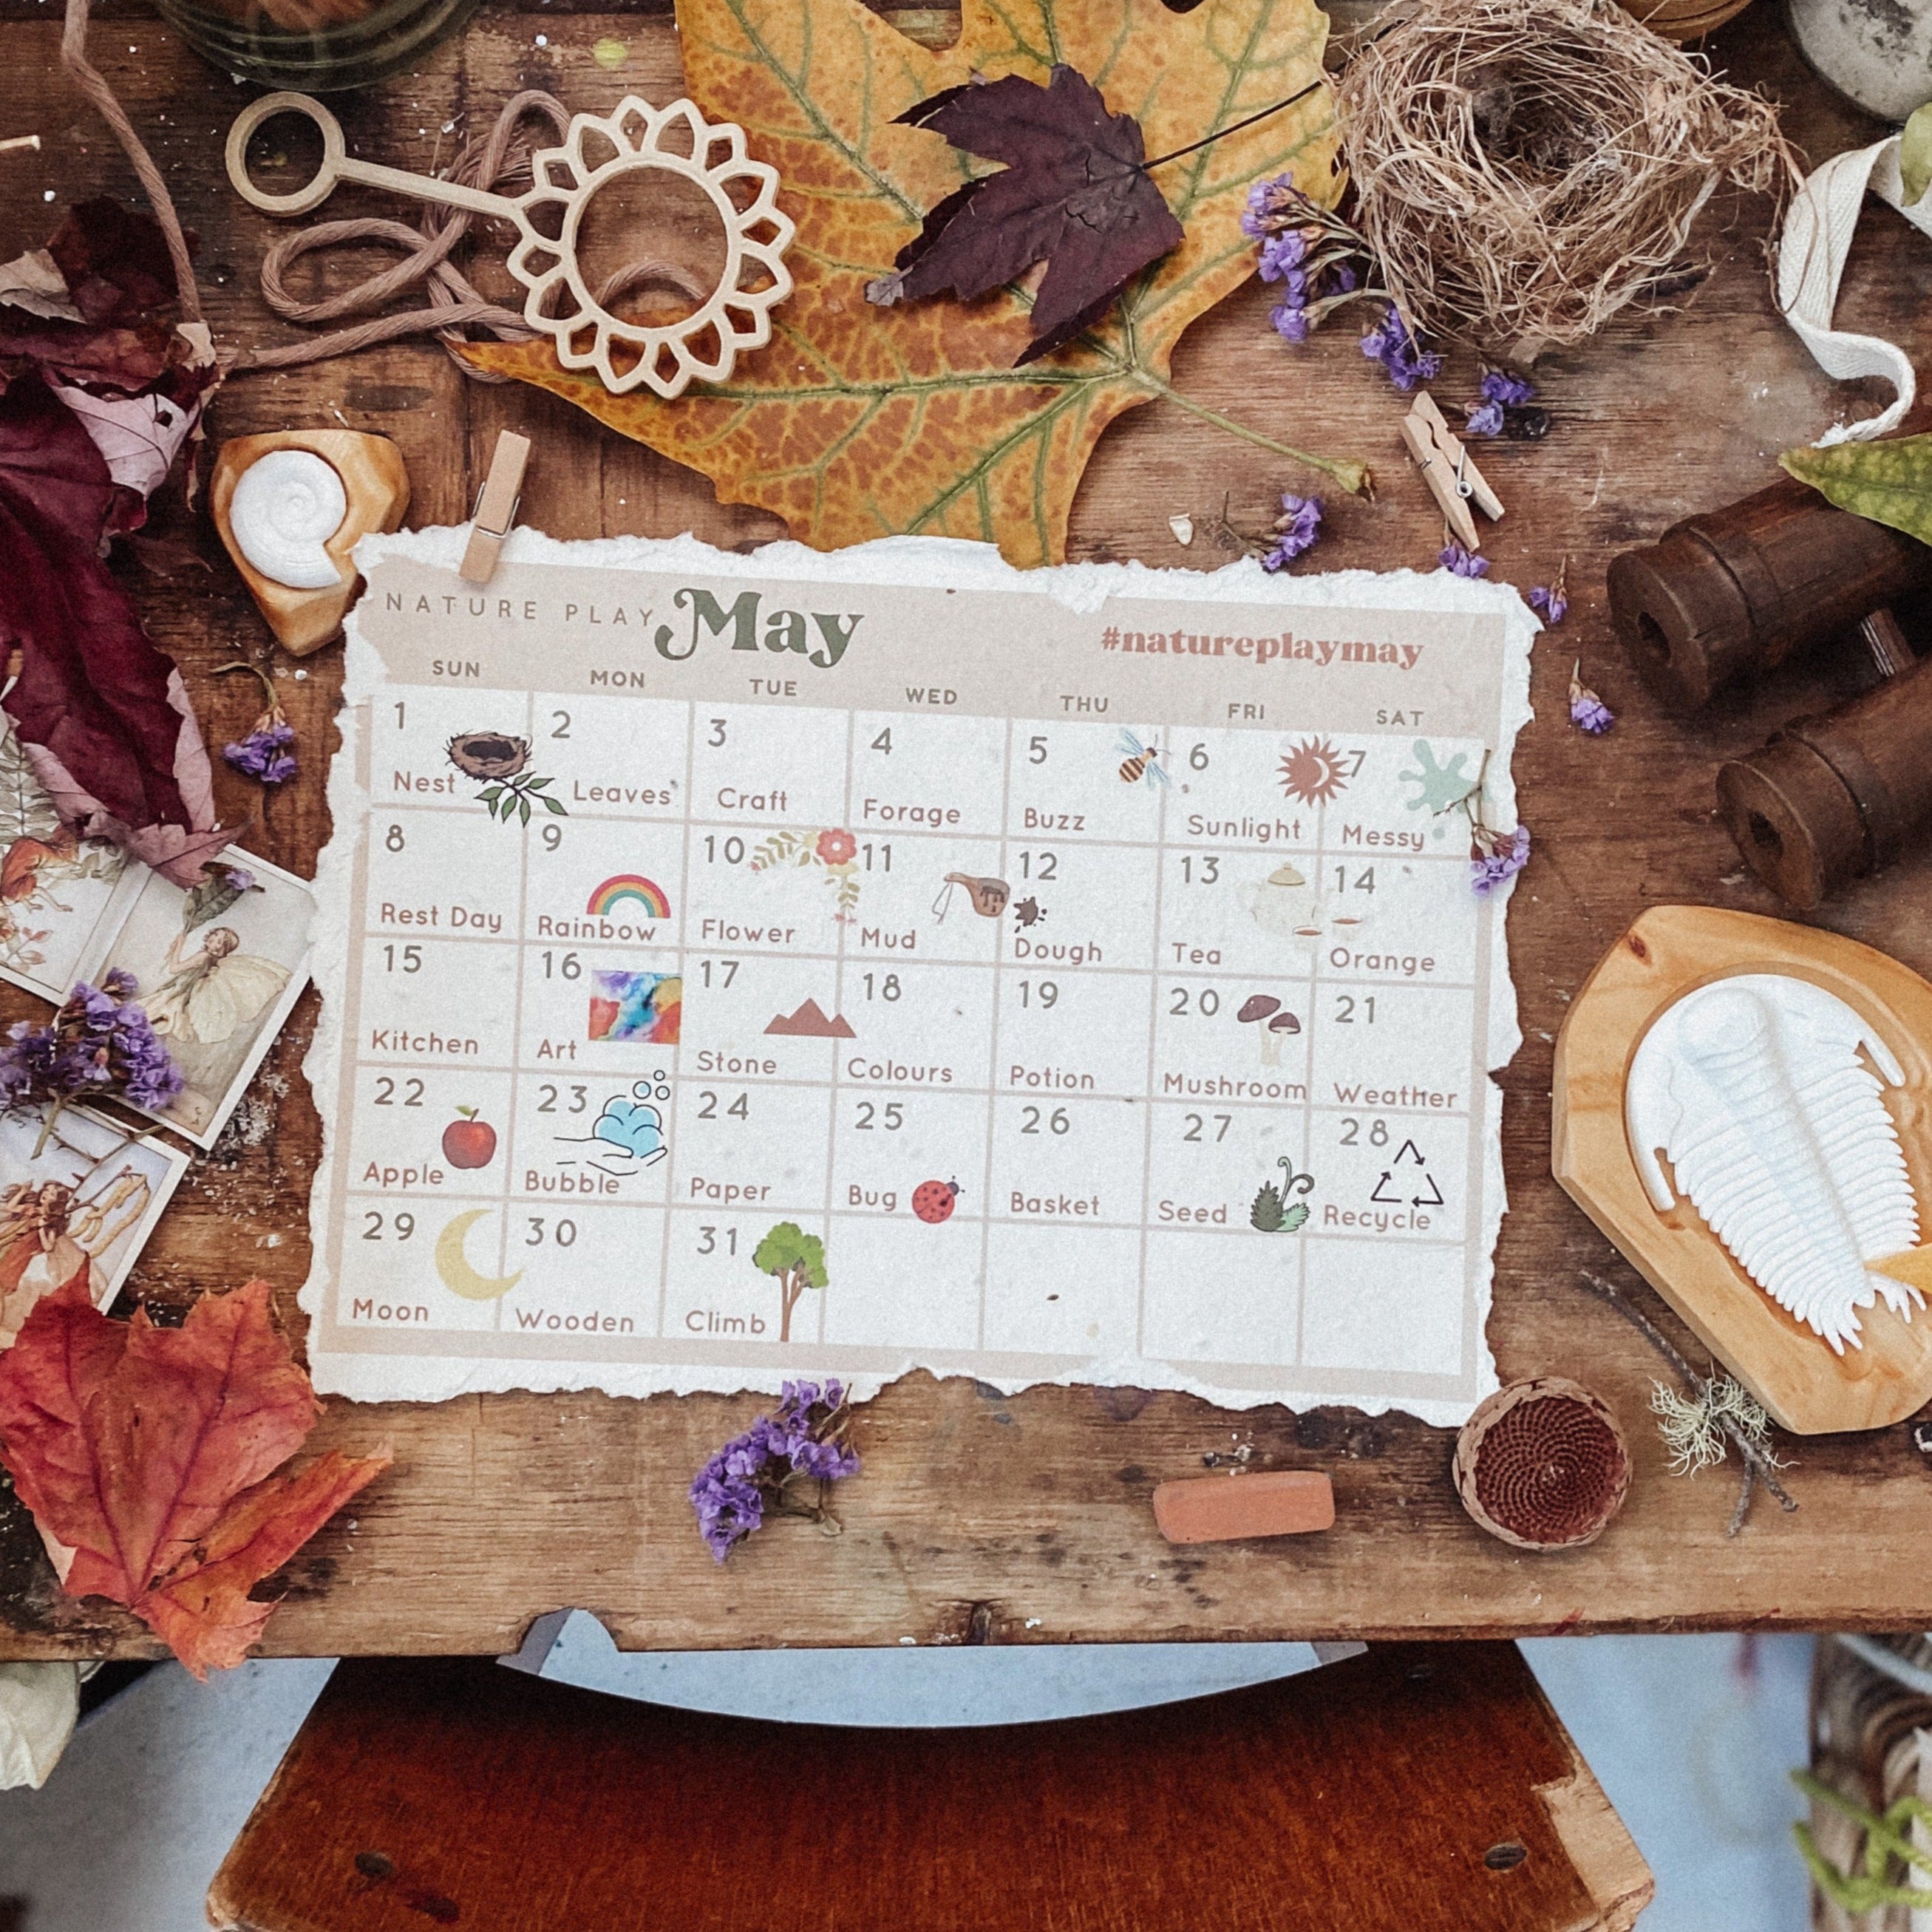 Nature Play May Calendar & Prompts